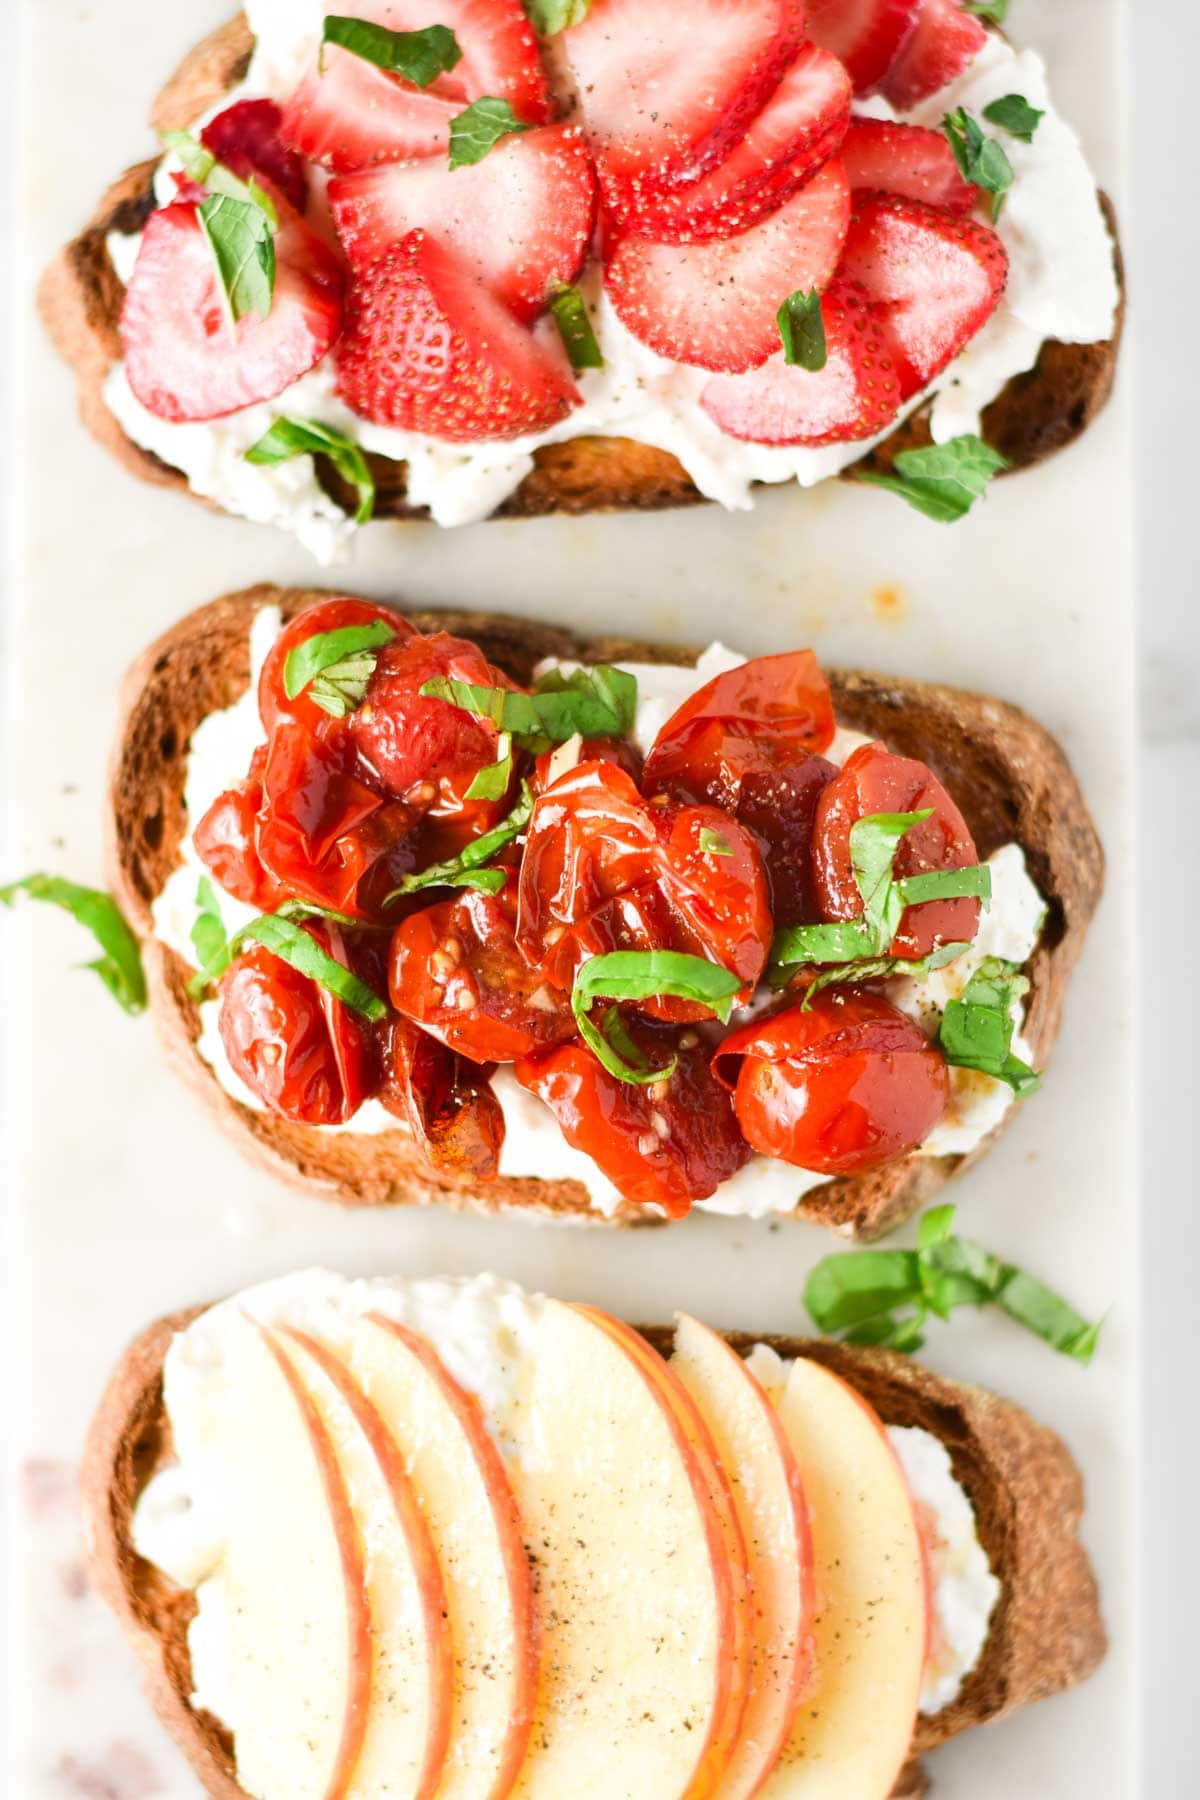 Roasted tomatoes, apples, and strawberries on top of toasts.